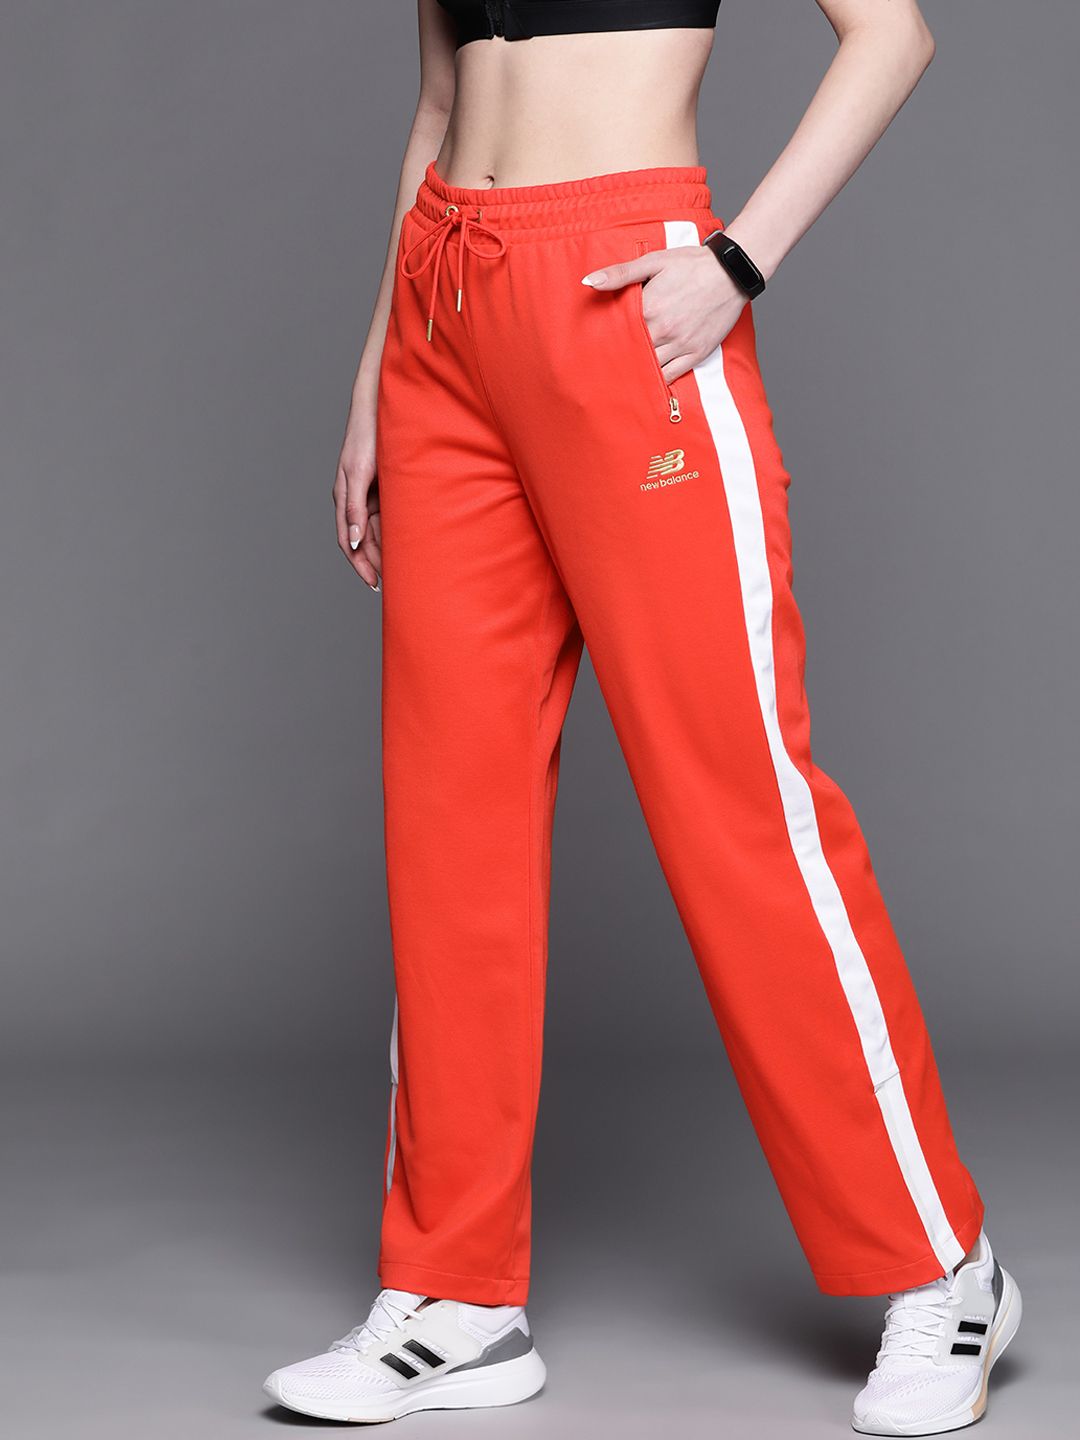 New Balance Women Red Solid Athleisure Track Pants Price in India